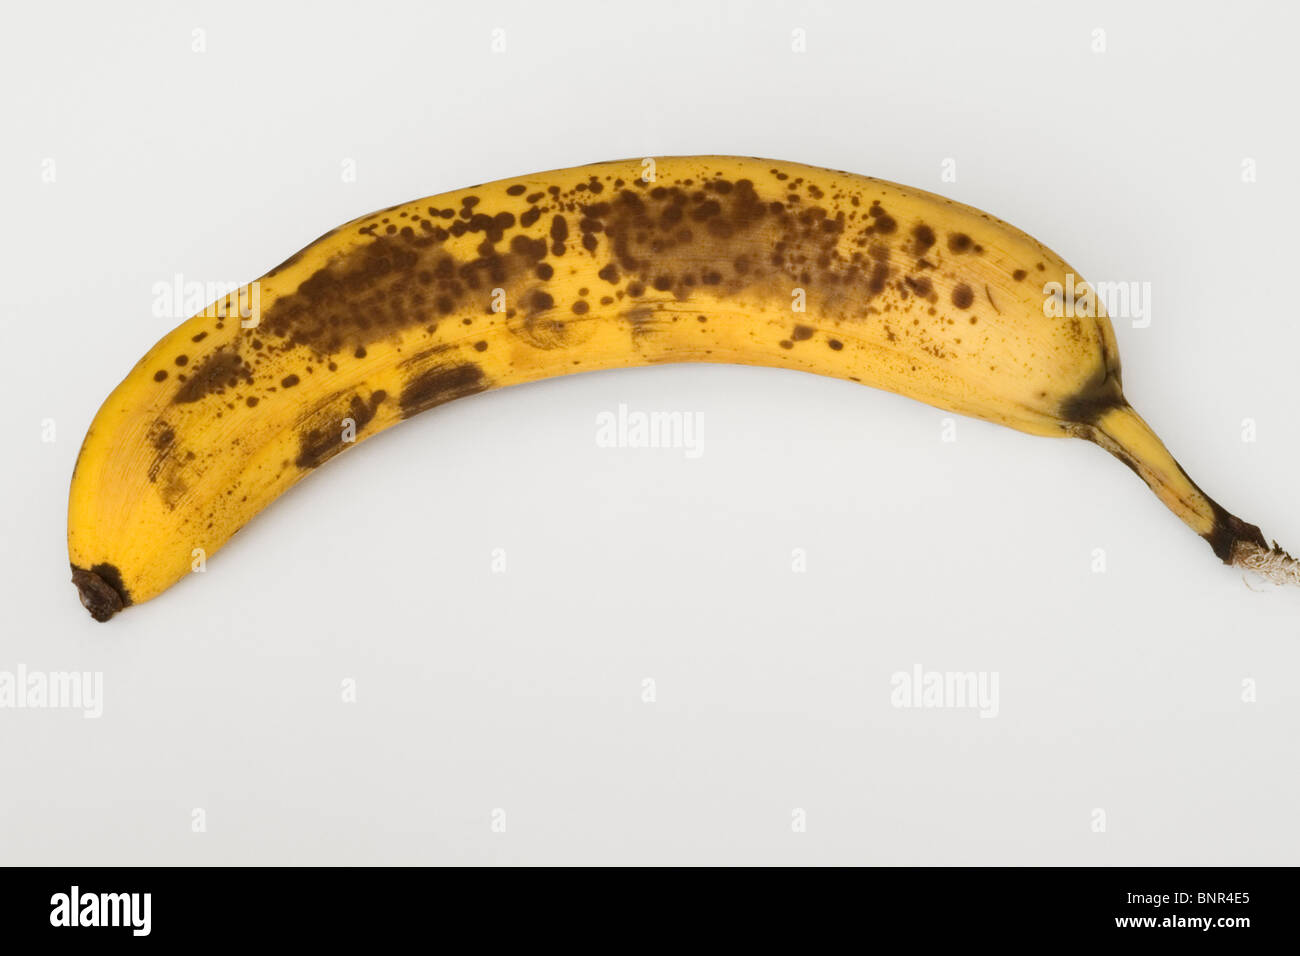 A banana which is showing brown spots and markings as it starts to over ripen Stock Photo